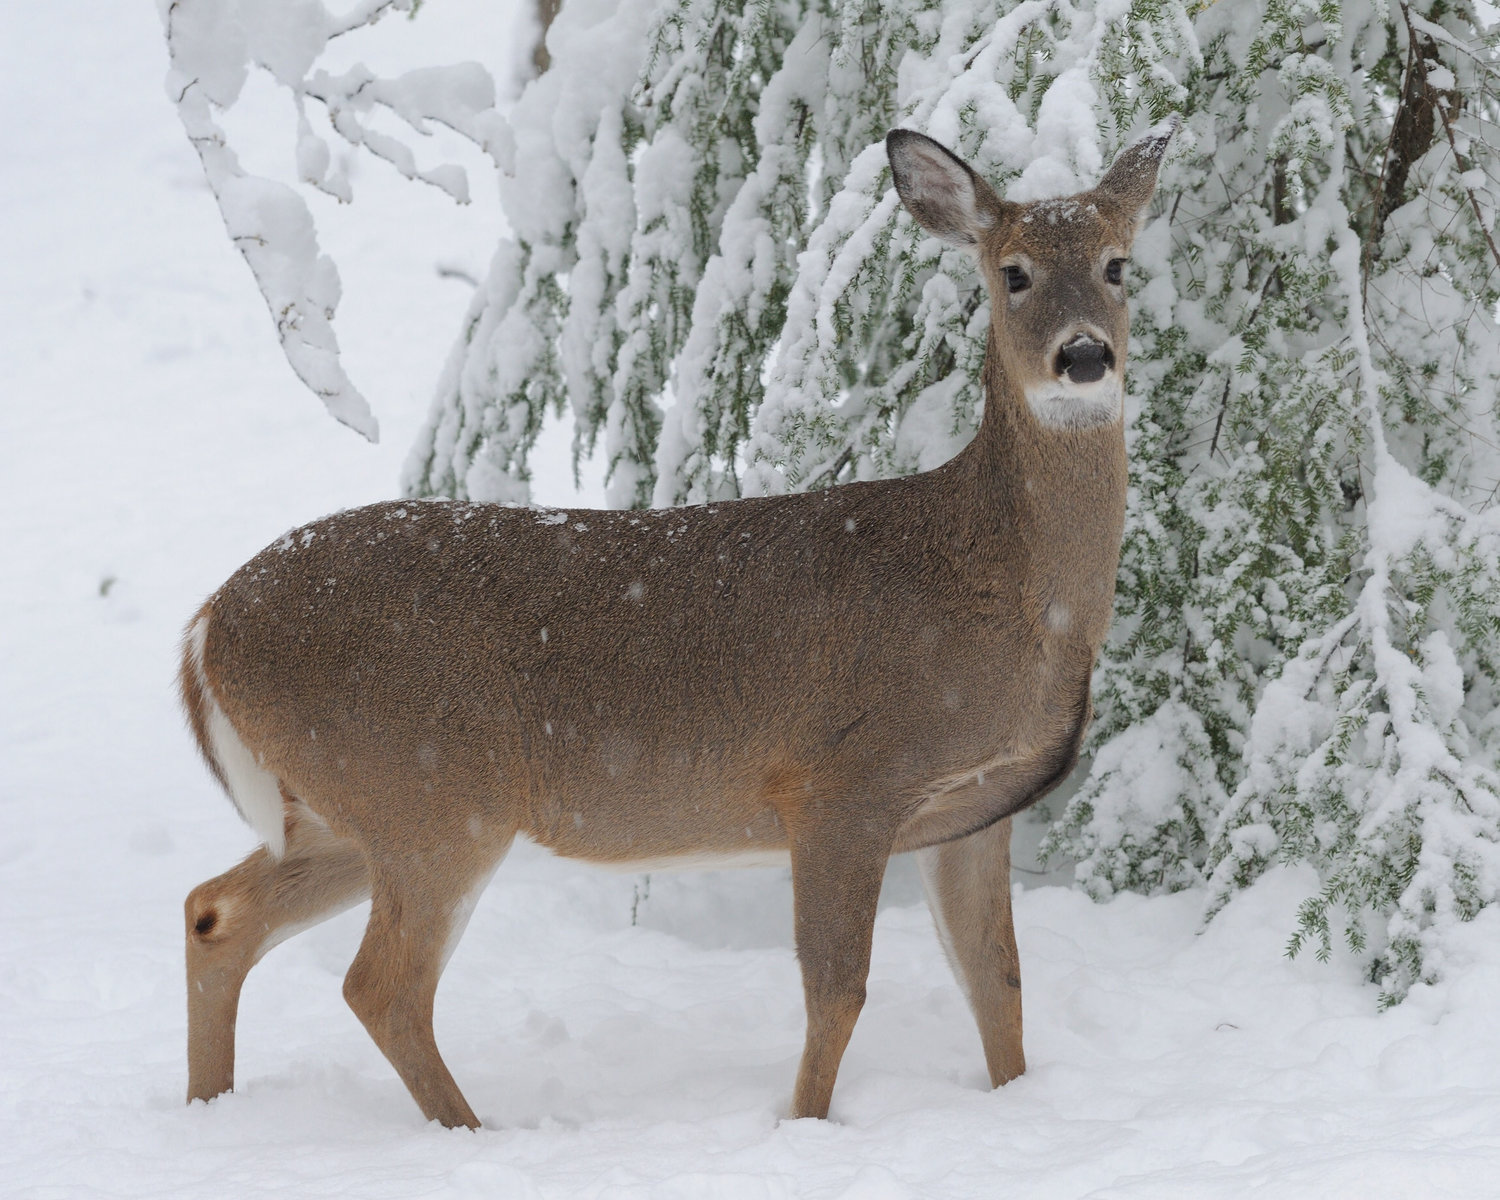 Deer are not classified as aquatic, but can be spotted swimming across rivers, or walking on river ice during winter. They can be spotted along banks of rivers or lakes as they forage for any small plants that are hidden in the snow. ..If you see a group of eagles perched on the ice, stop and have a closer look with the binoculars. Deer that are injured by vehicles on the highway might make it onto a frozen part of a river, only to succumb to their injuries. Eagles are quick to spot the carcass on the ice; many will arrive for the feast.....